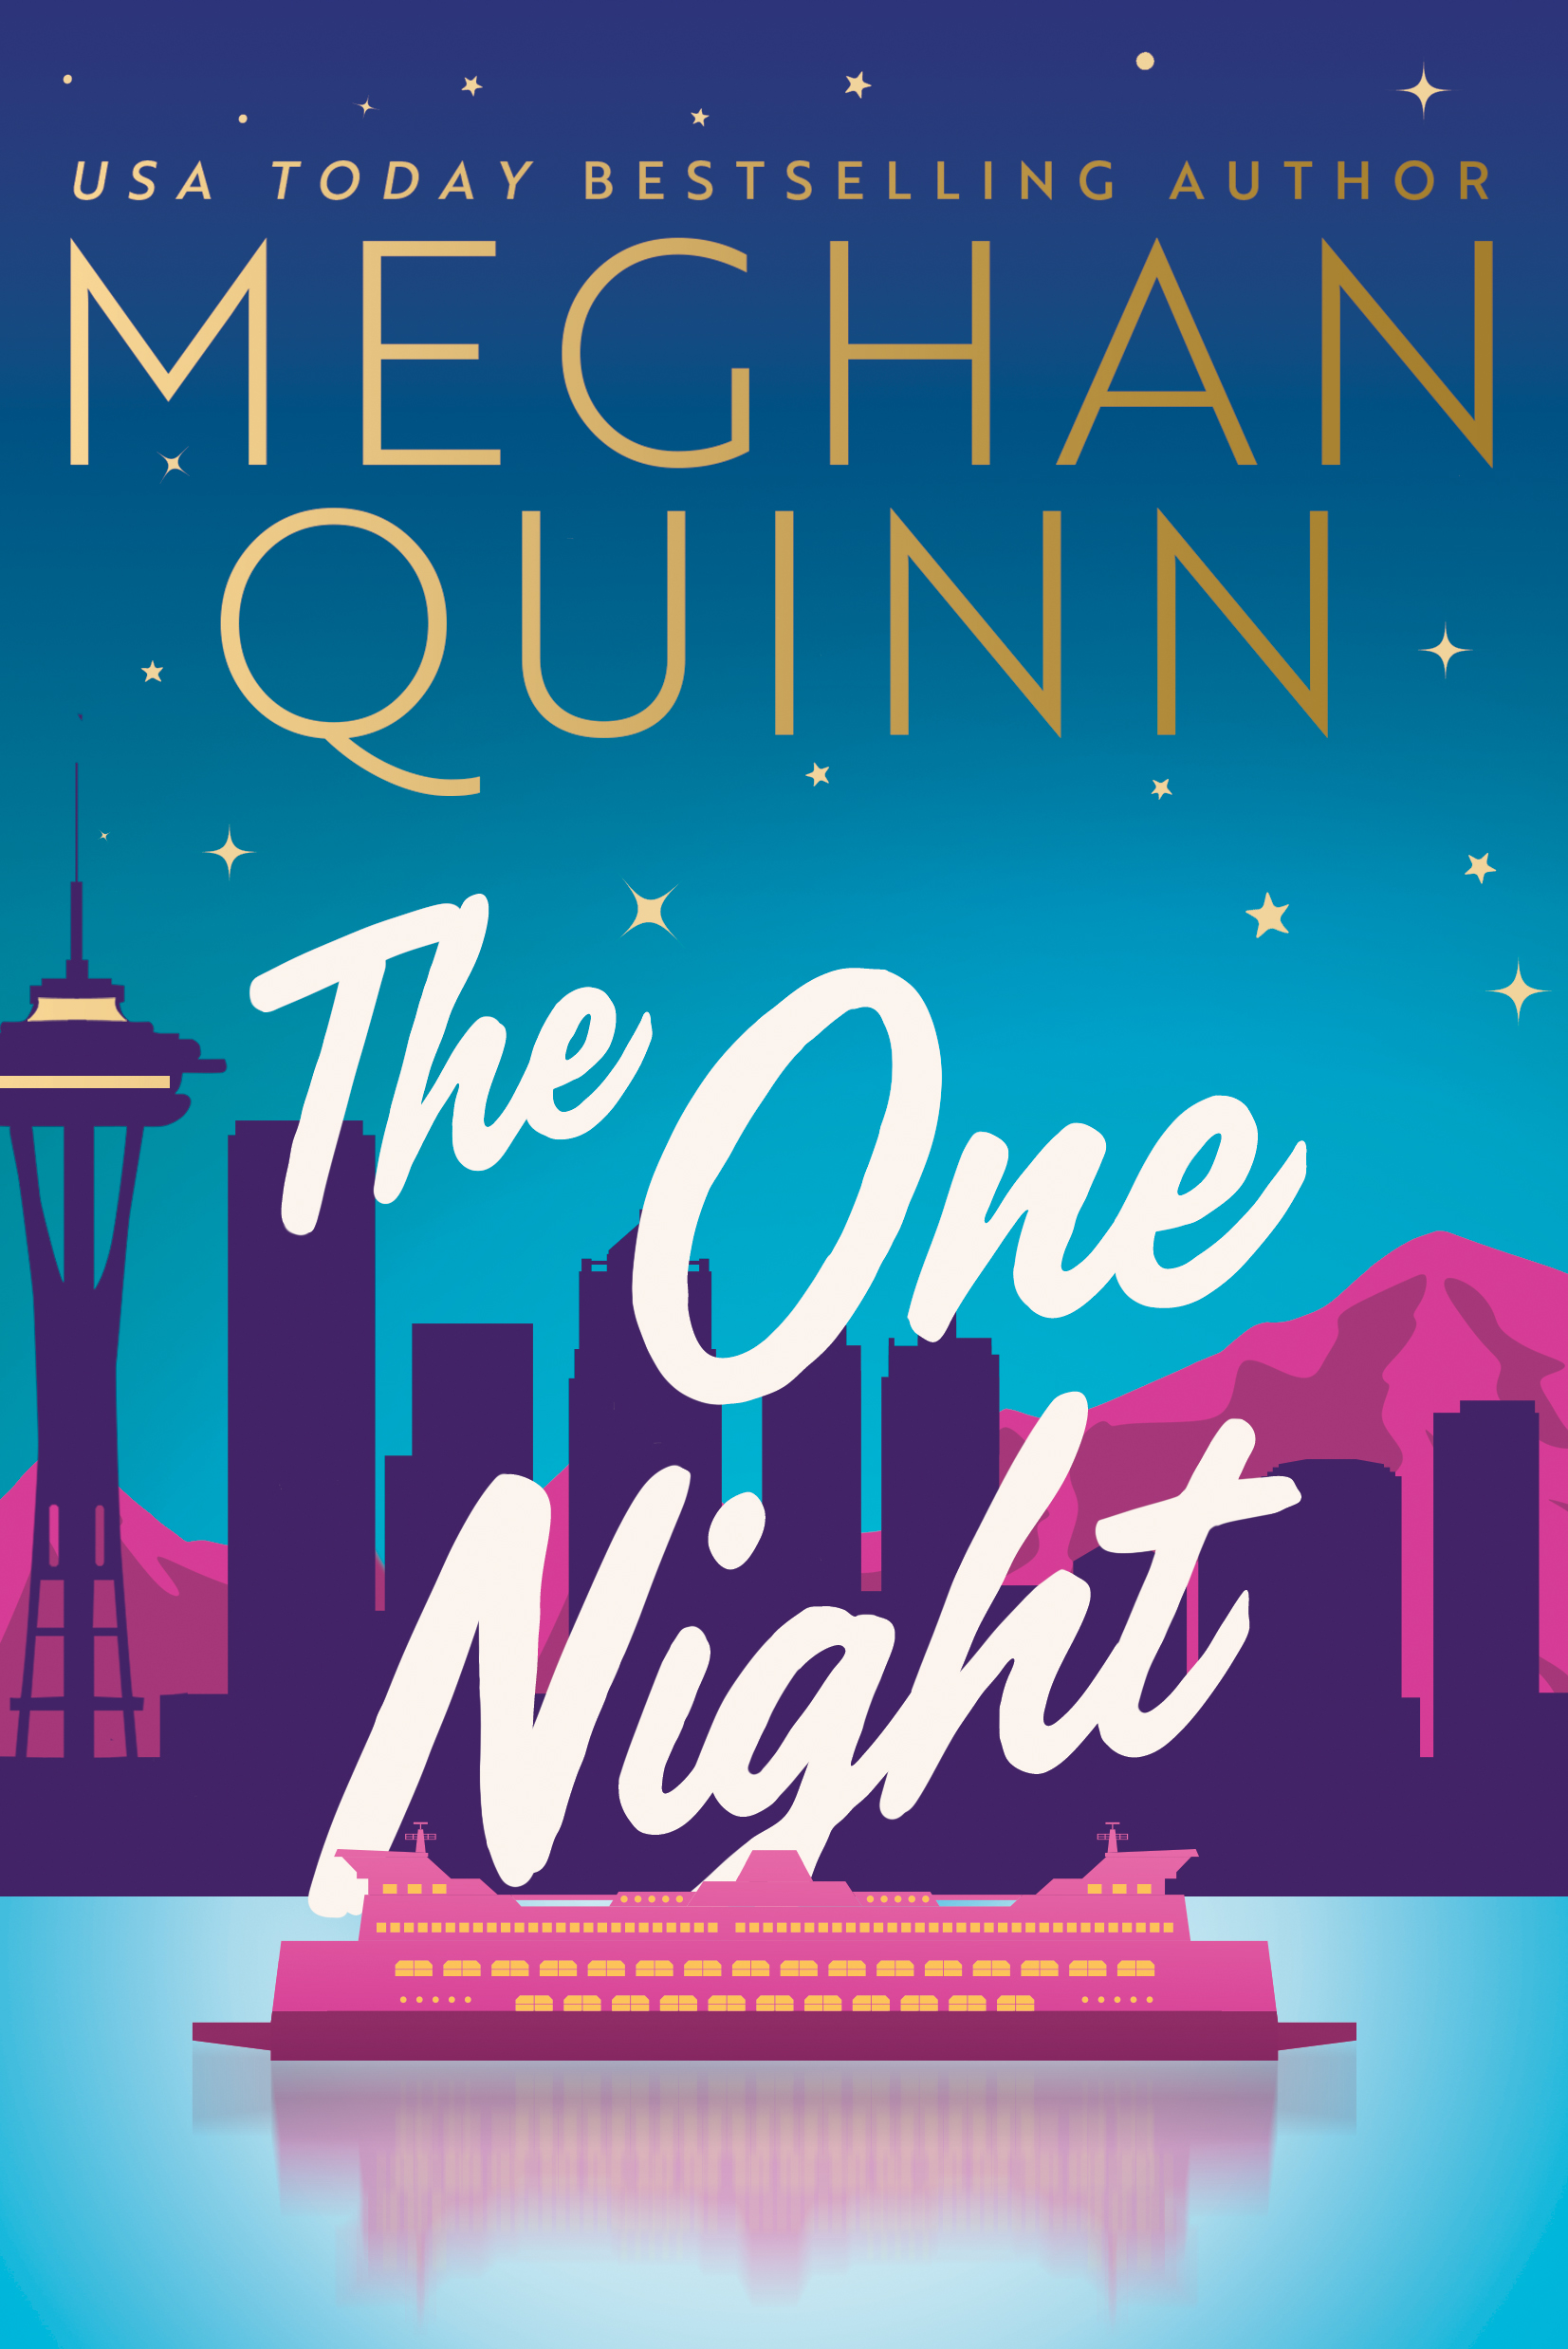 THE ONE NIGHT Cover - Meghan Quinn